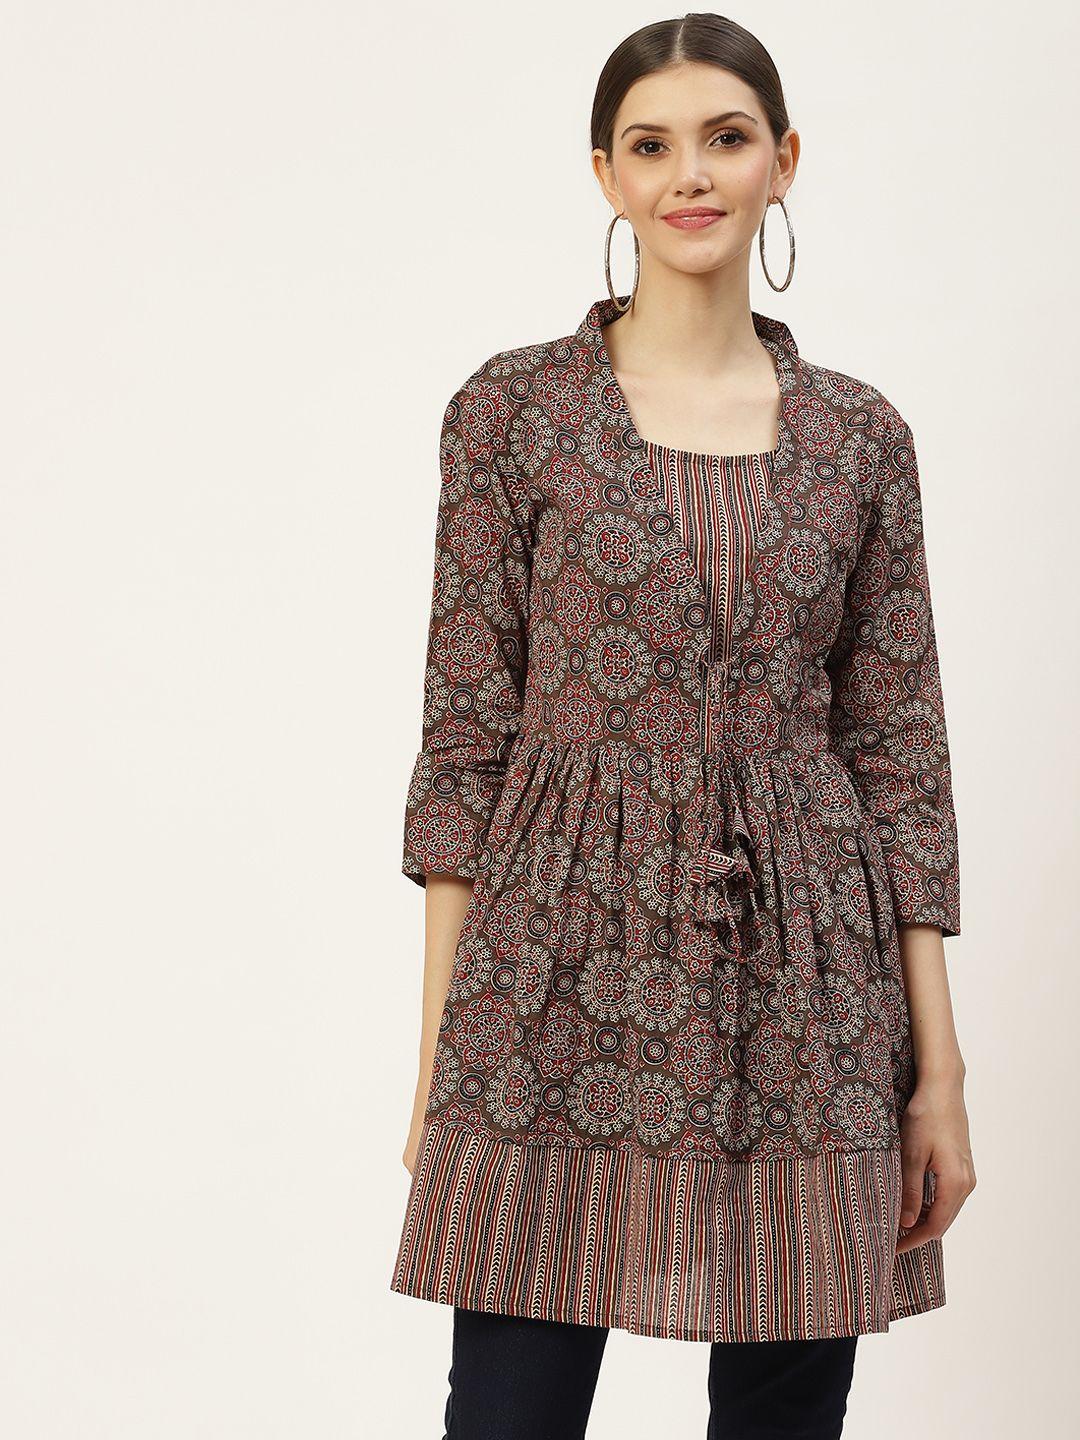 kbz brown & red ethnic motifs printed pure cotton top